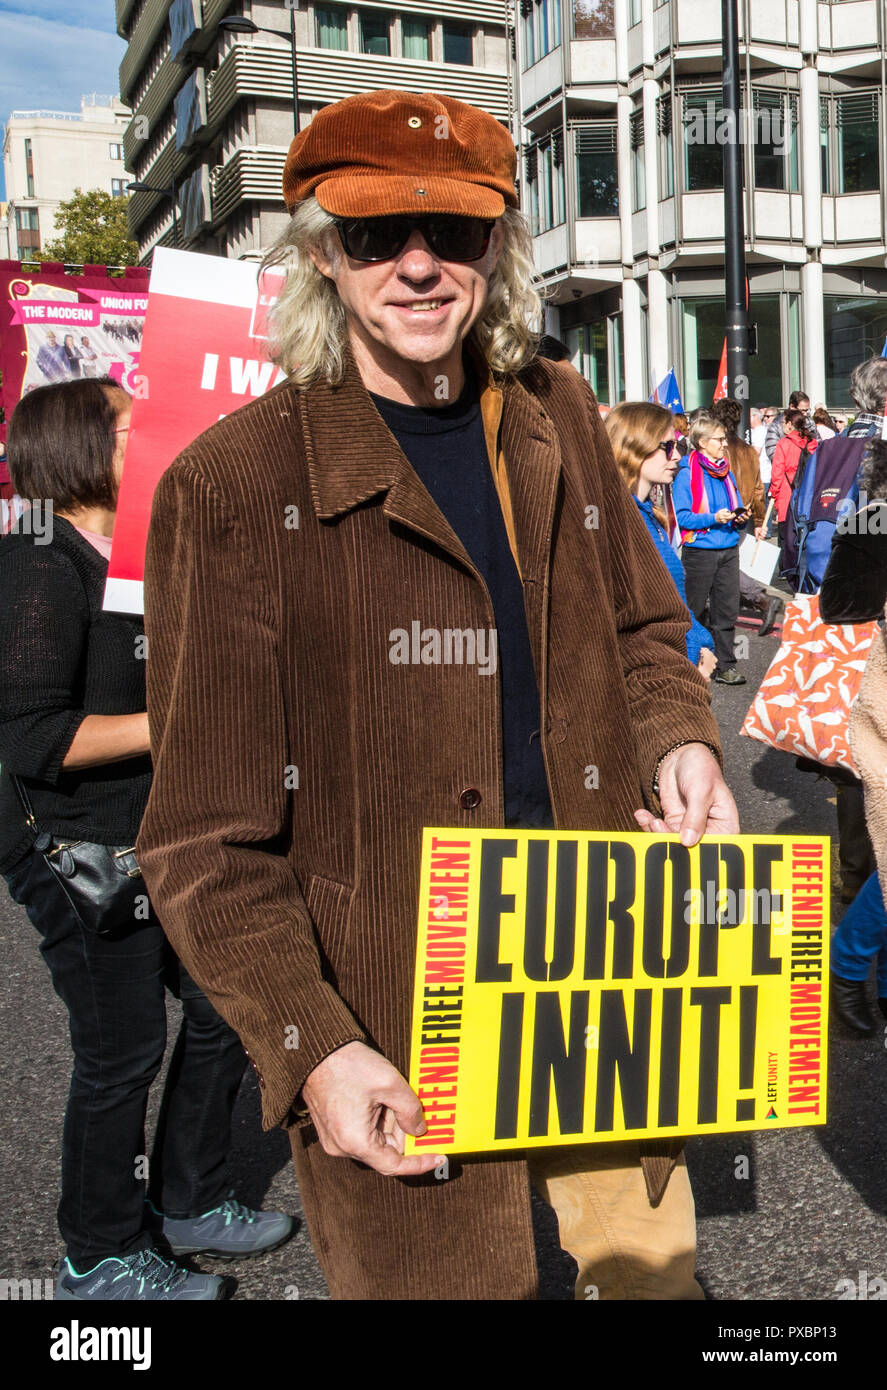 London, UK. 20th Oct, 2018. Hundreds of thousands of people from across the UK join a march and rally in support of a Peoples Vote (Referendum) on the final Brexit deal with an option to remain inside the EU. Starting in Park Lane, the march ended in Parliament Square where there were speeches from leading campaigners. The emphasis of the march was on young people who will be affected by the consequences for longer. More info: www.peoples-vote. Credit: Bob Broglia/Alamy Live News Stock Photo